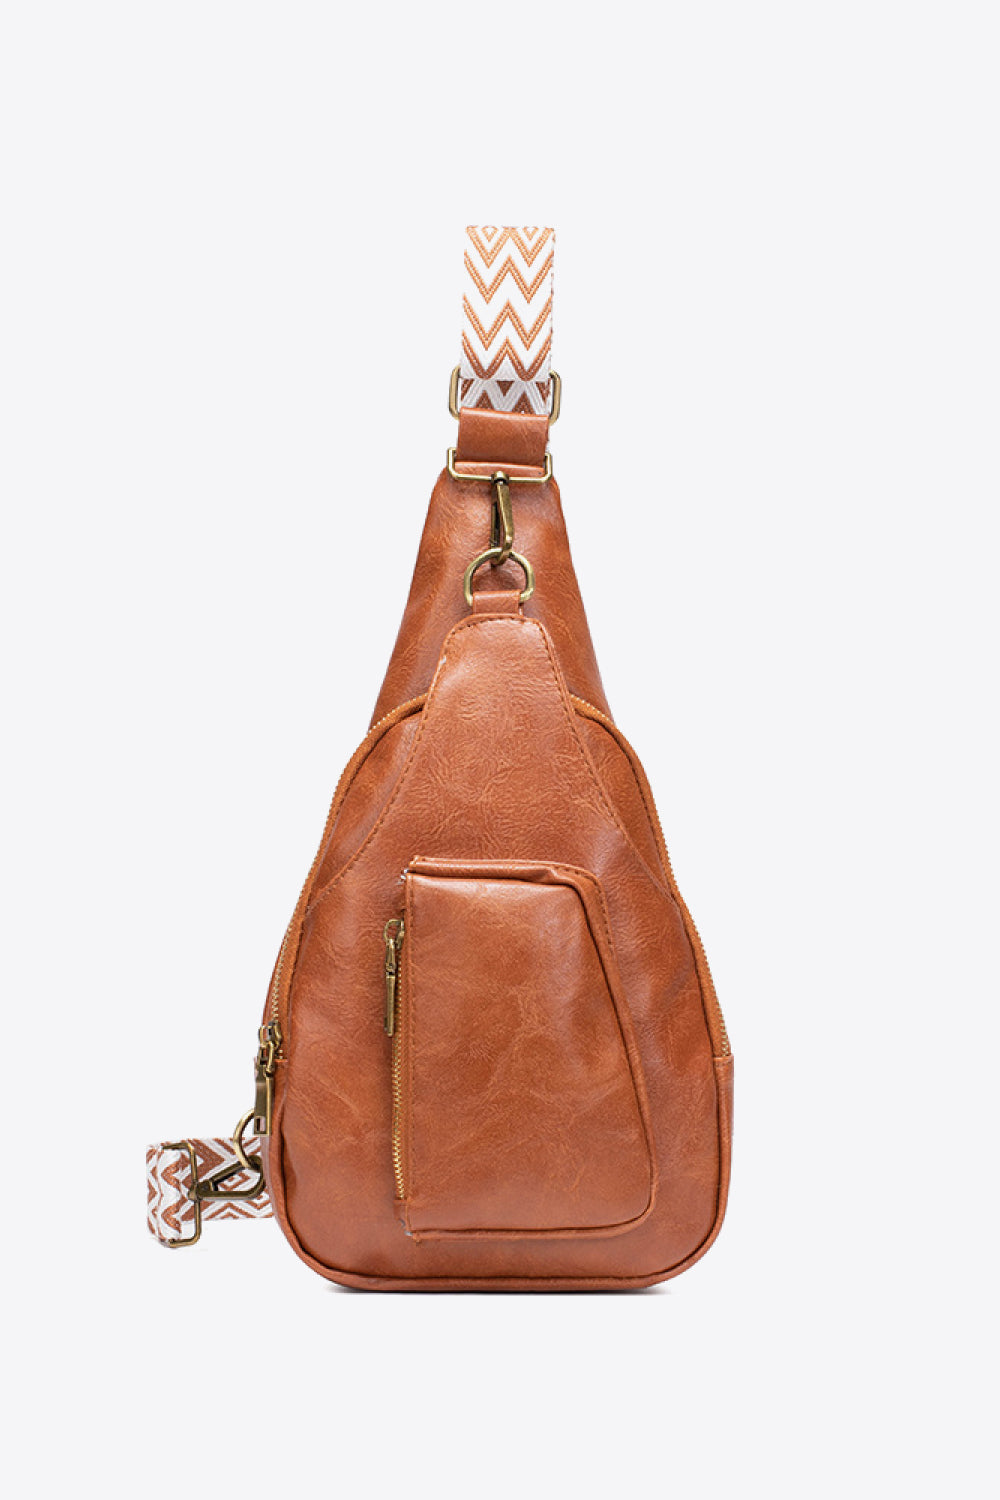 All The Feels PU Leather Sling Bag COCO CRESS